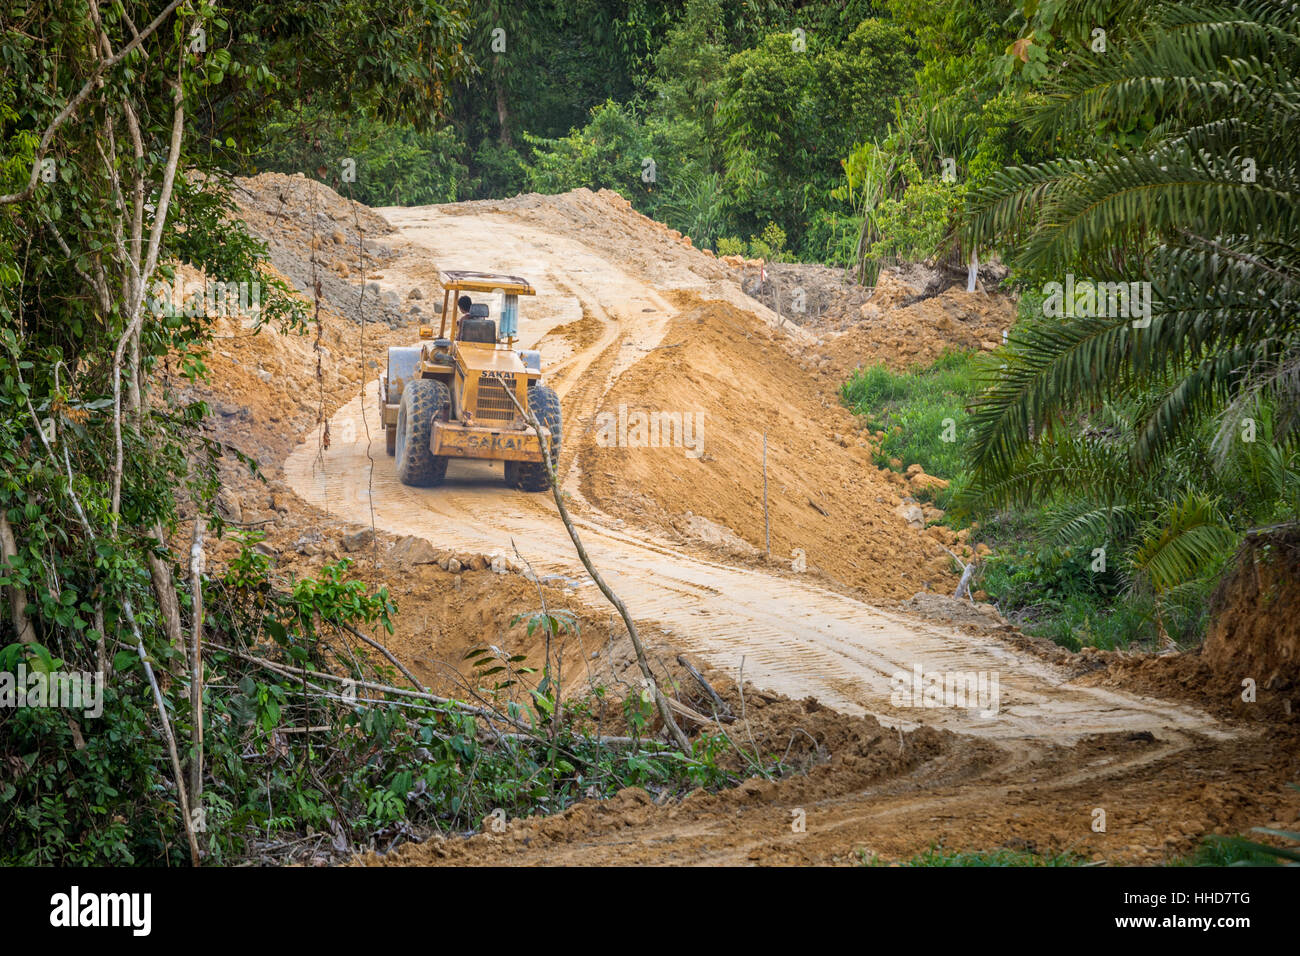 JCB digger on a road being constructed through rainforest in remote northern Sabah, Malaysian Borneo Stock Photo